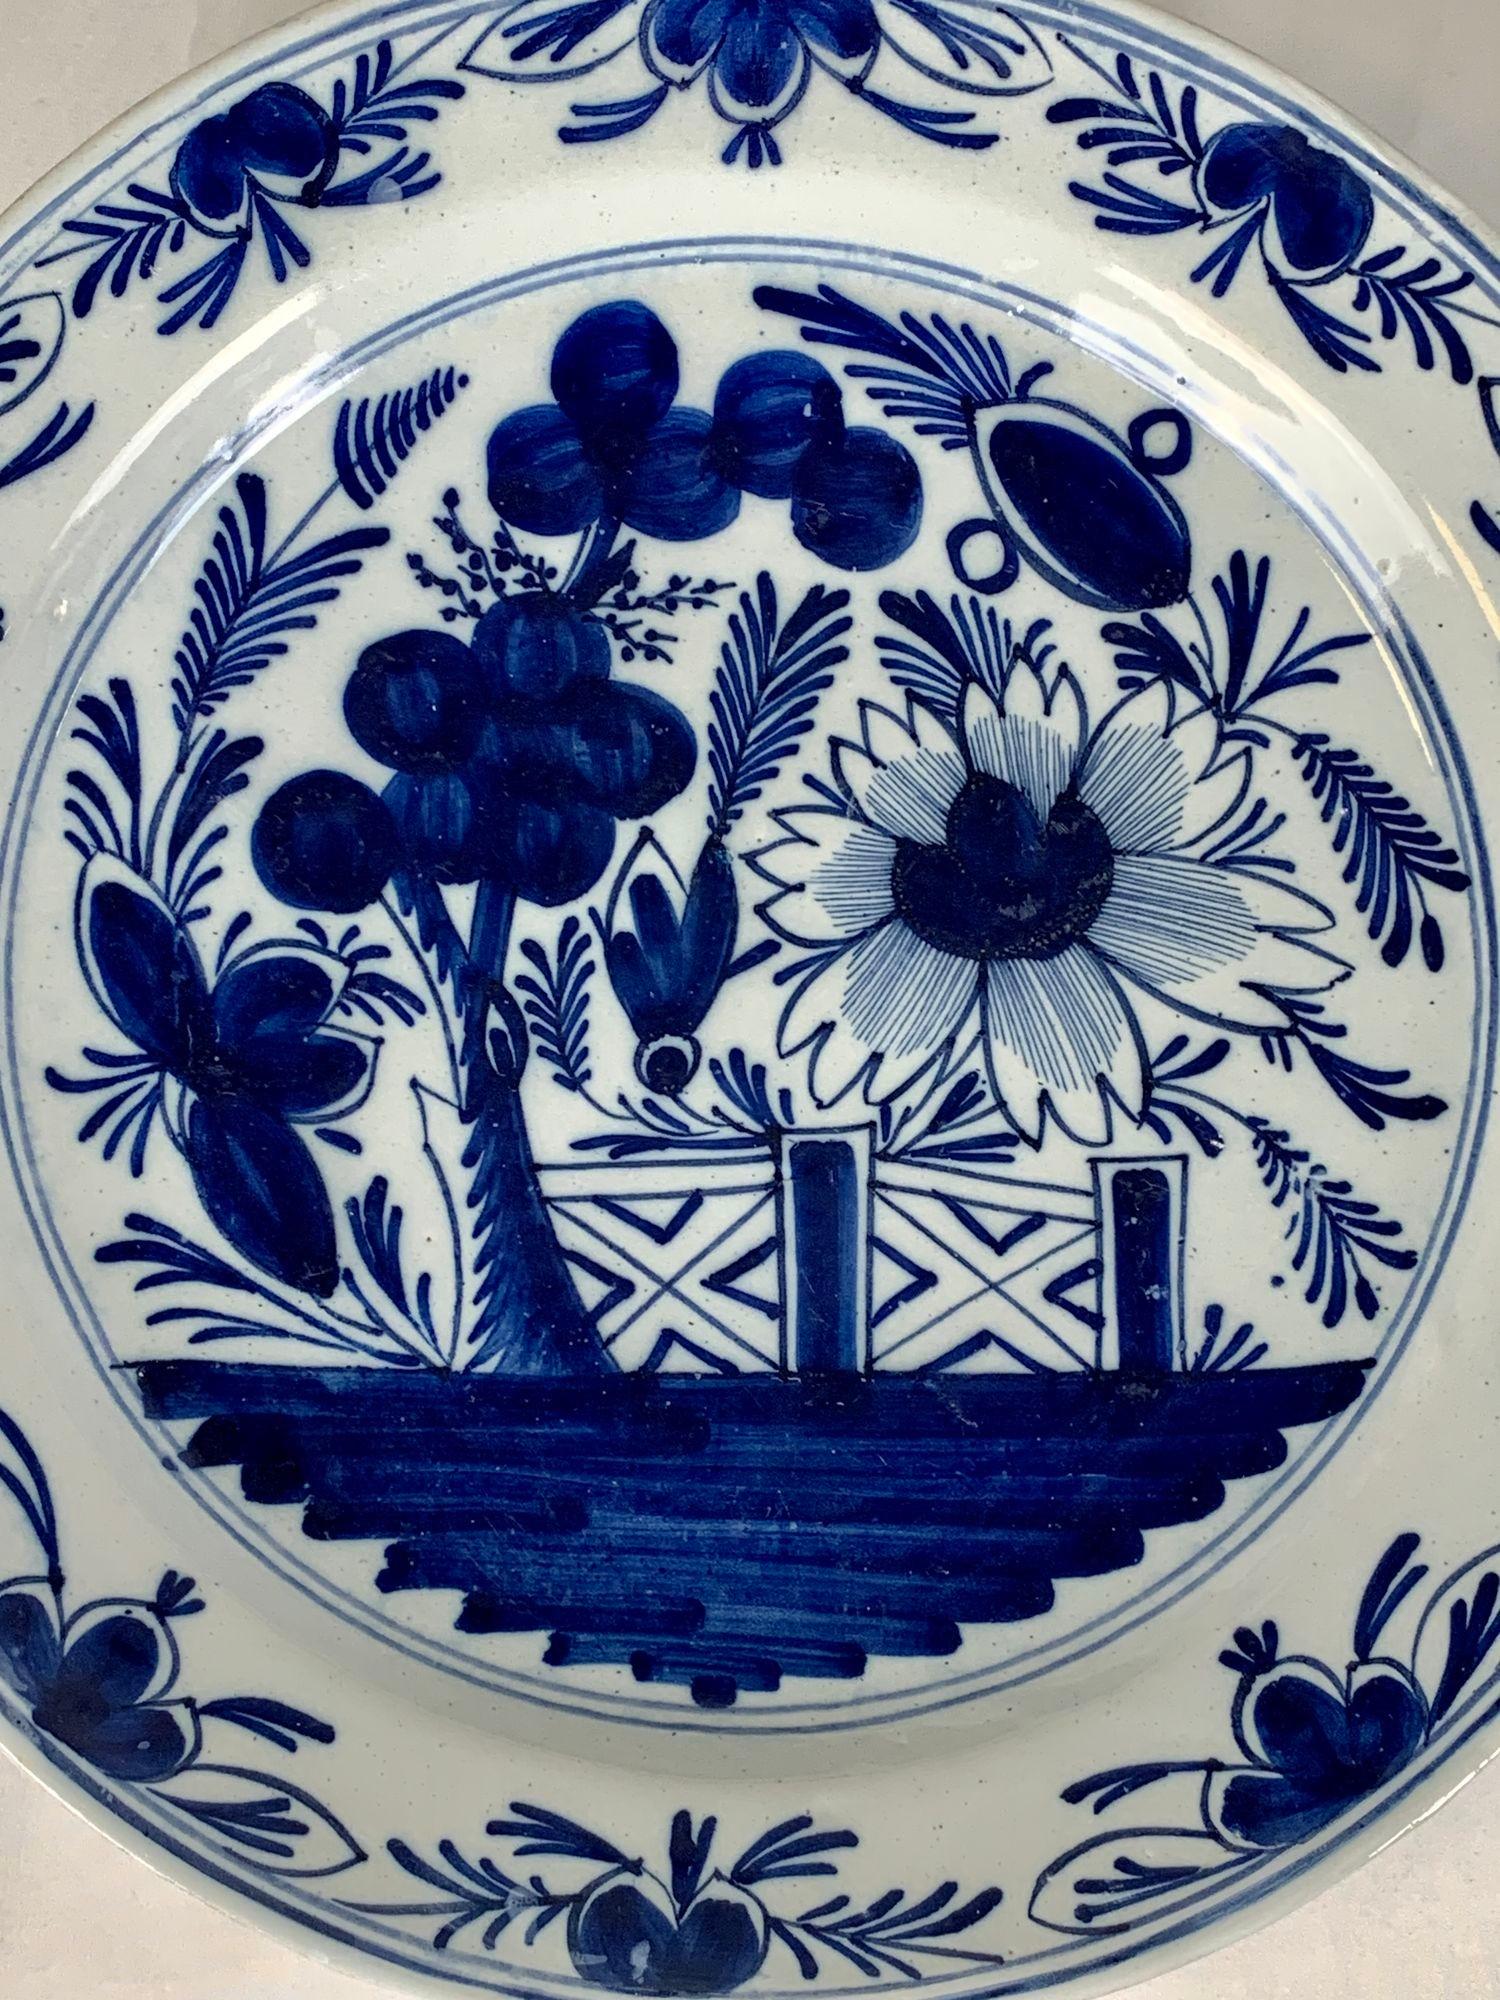 Made in the Netherlands circa 1800, this antique blue and white Dutch Delft charger has beautiful cobalt blue coloring.
The center shows a garden with large flowers and buds, a leafy tree, and a garden fence.
The bright cobalt blue is splendid on